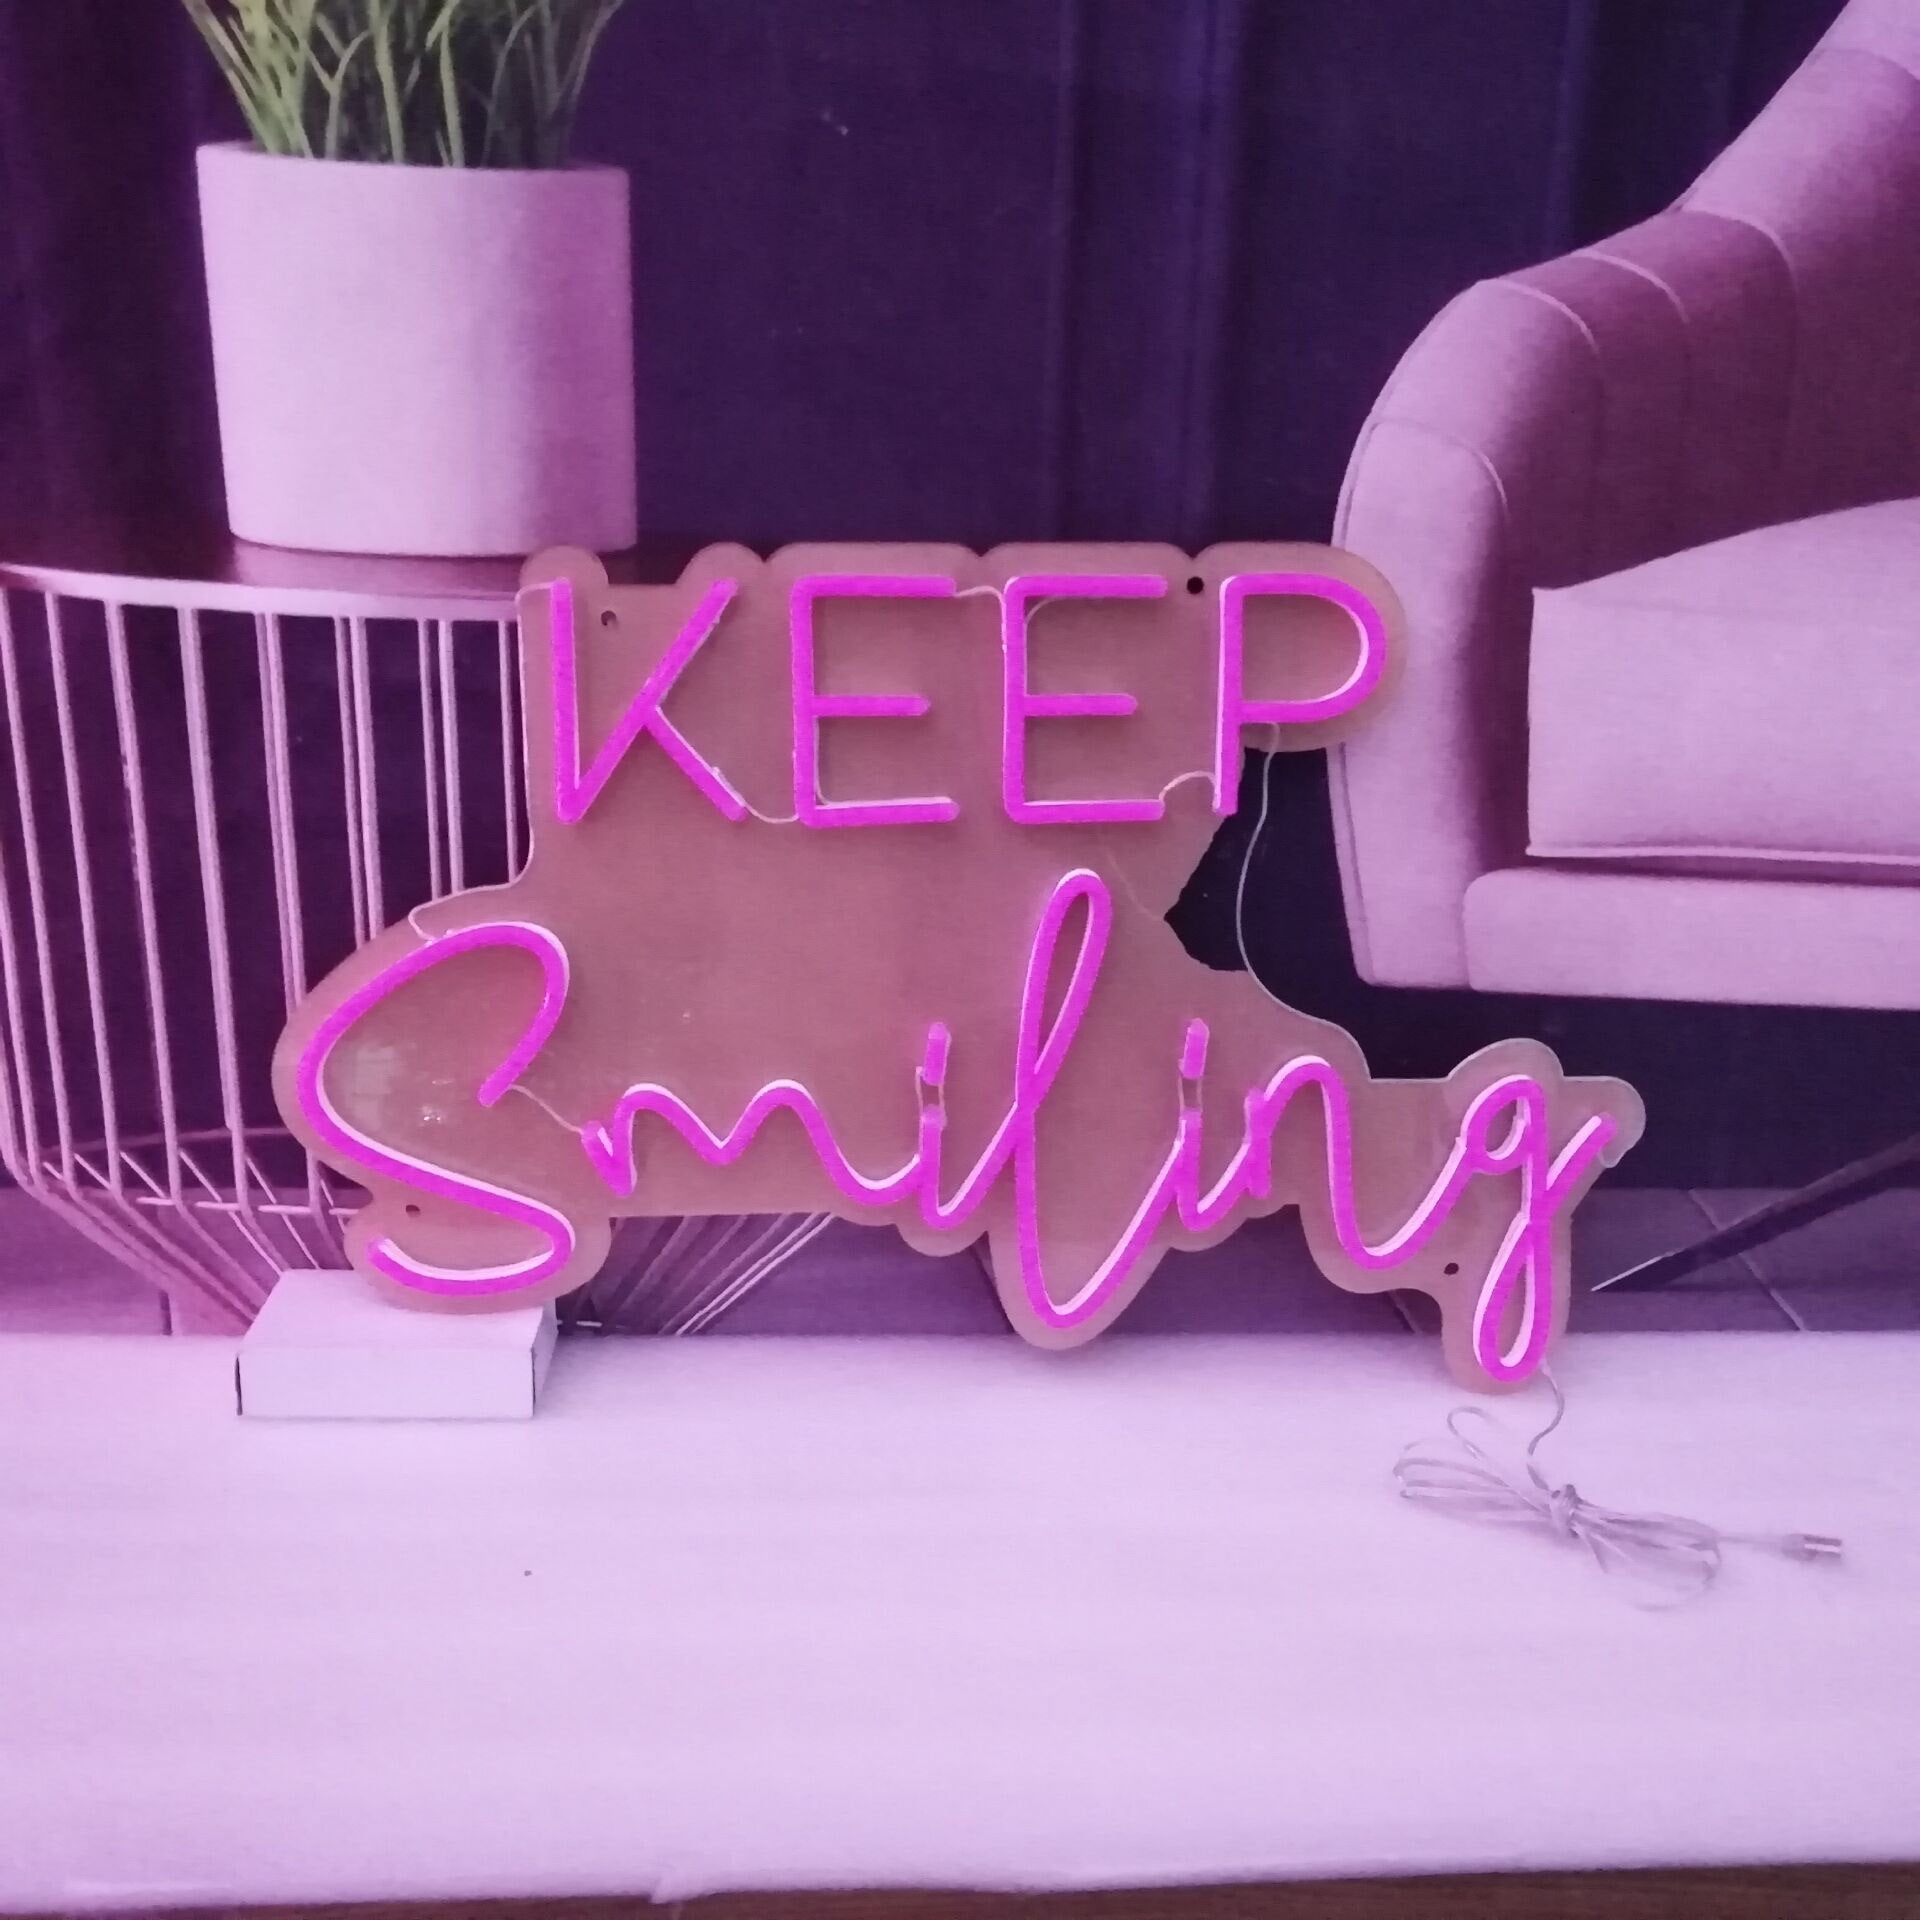 KEEP Smiling Neon Signs